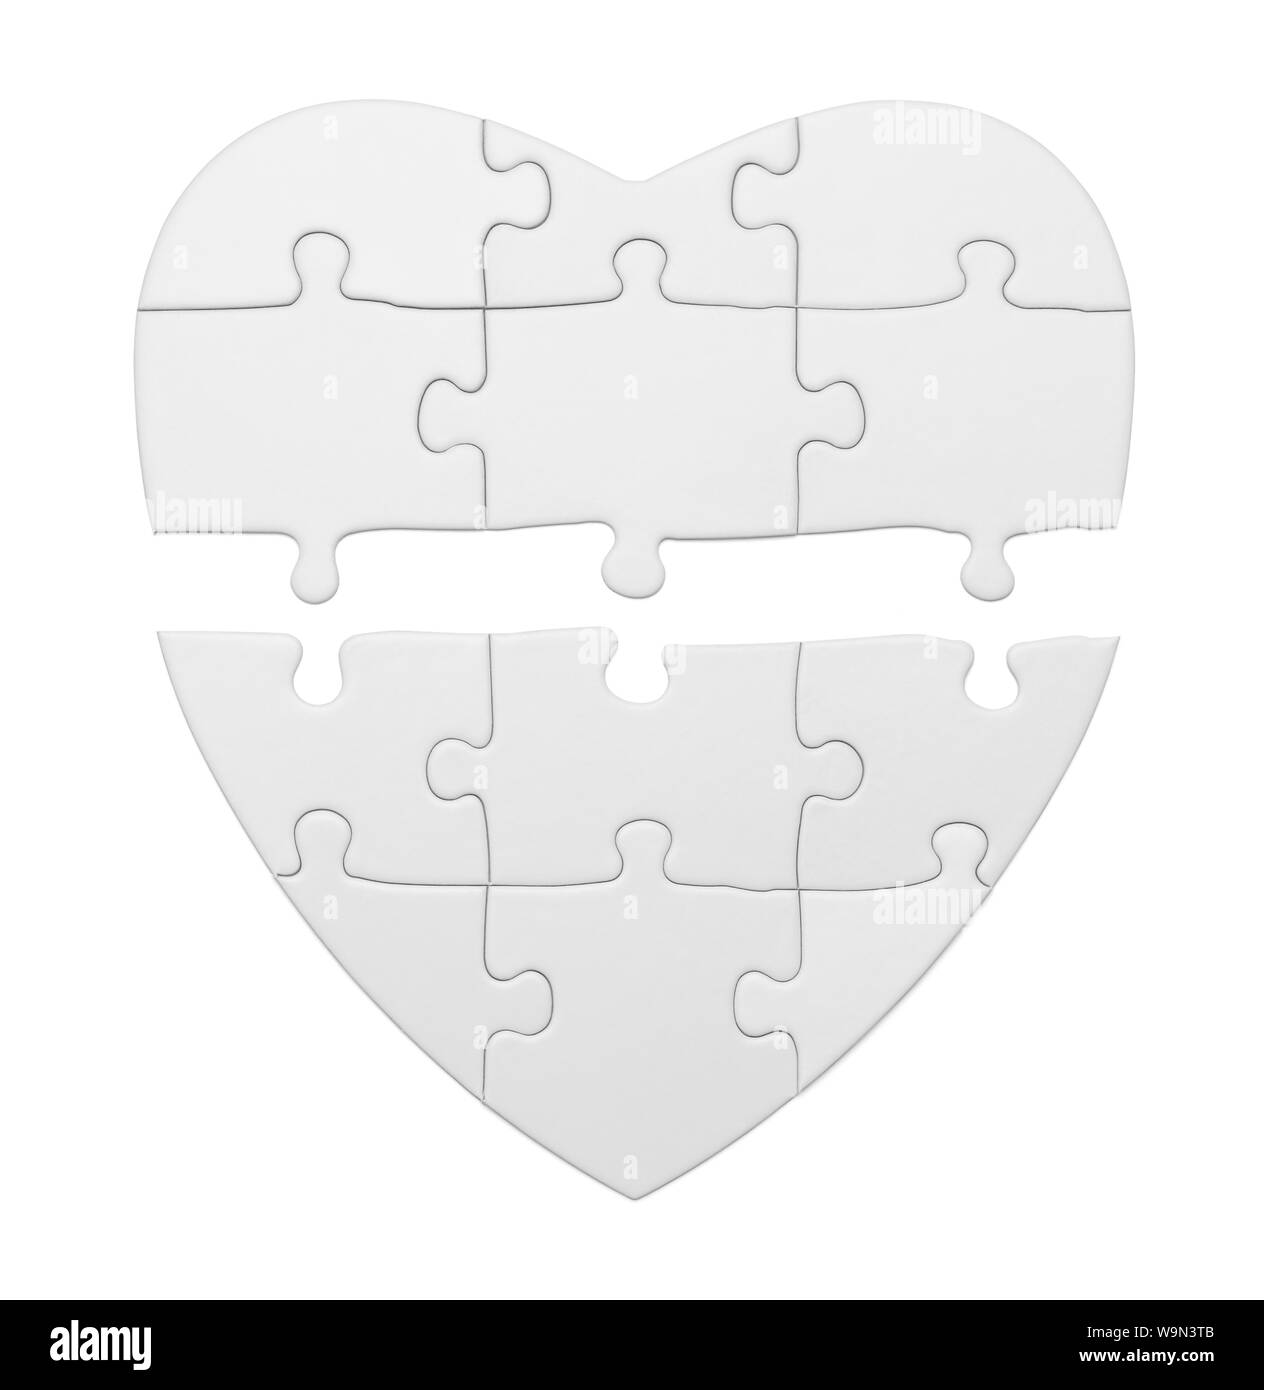 Broken Heart Puzzle Isolated on White Background. Stock Photo